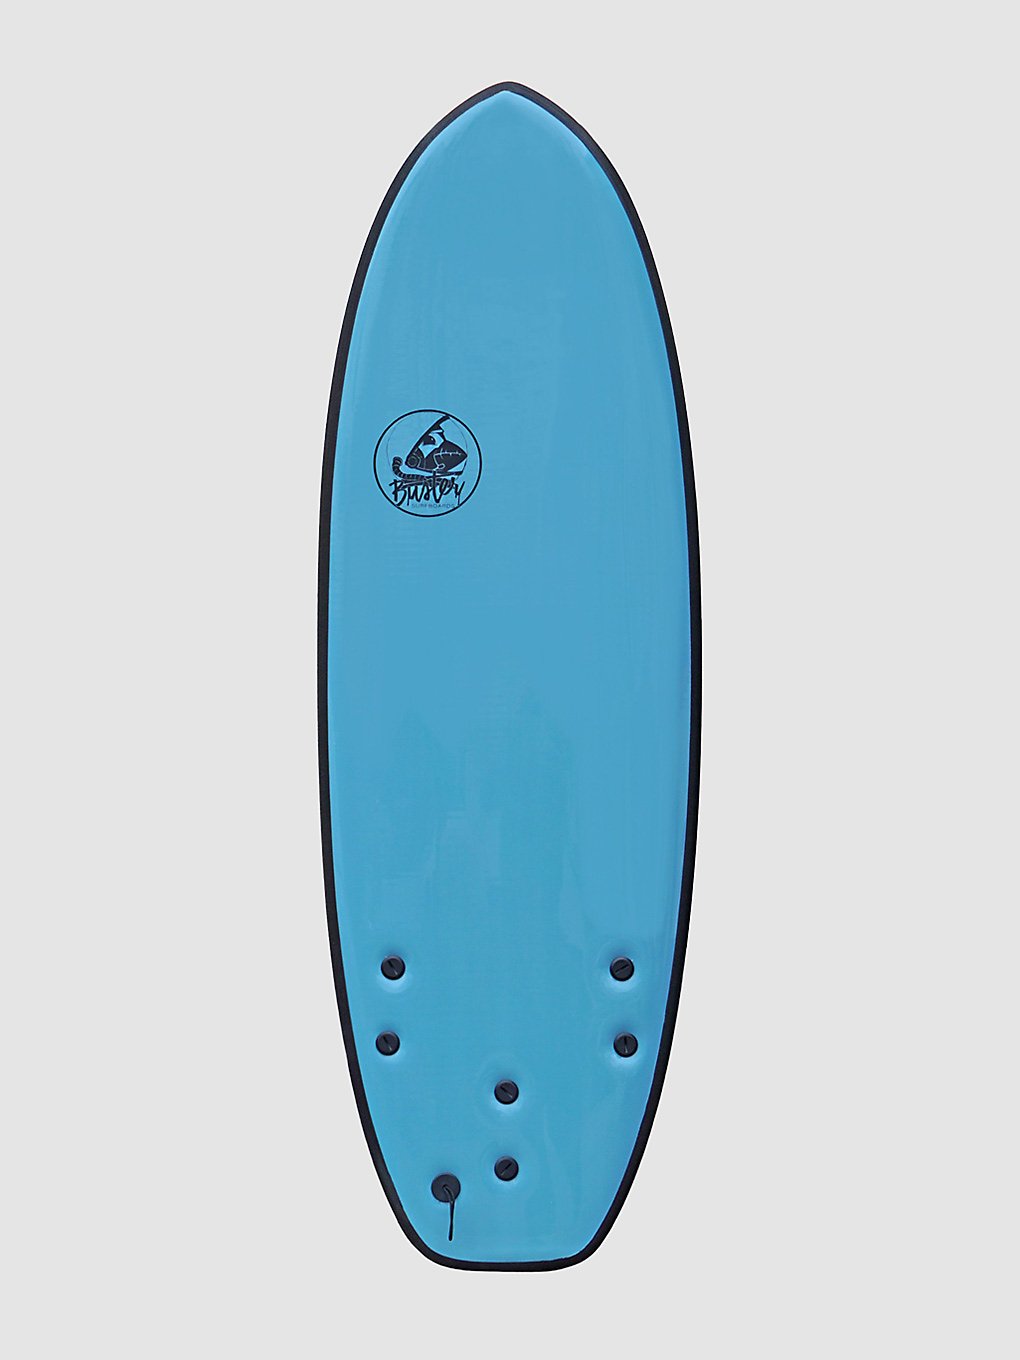 Buster Puffy Puffin 4'8 Riversurfboard blue